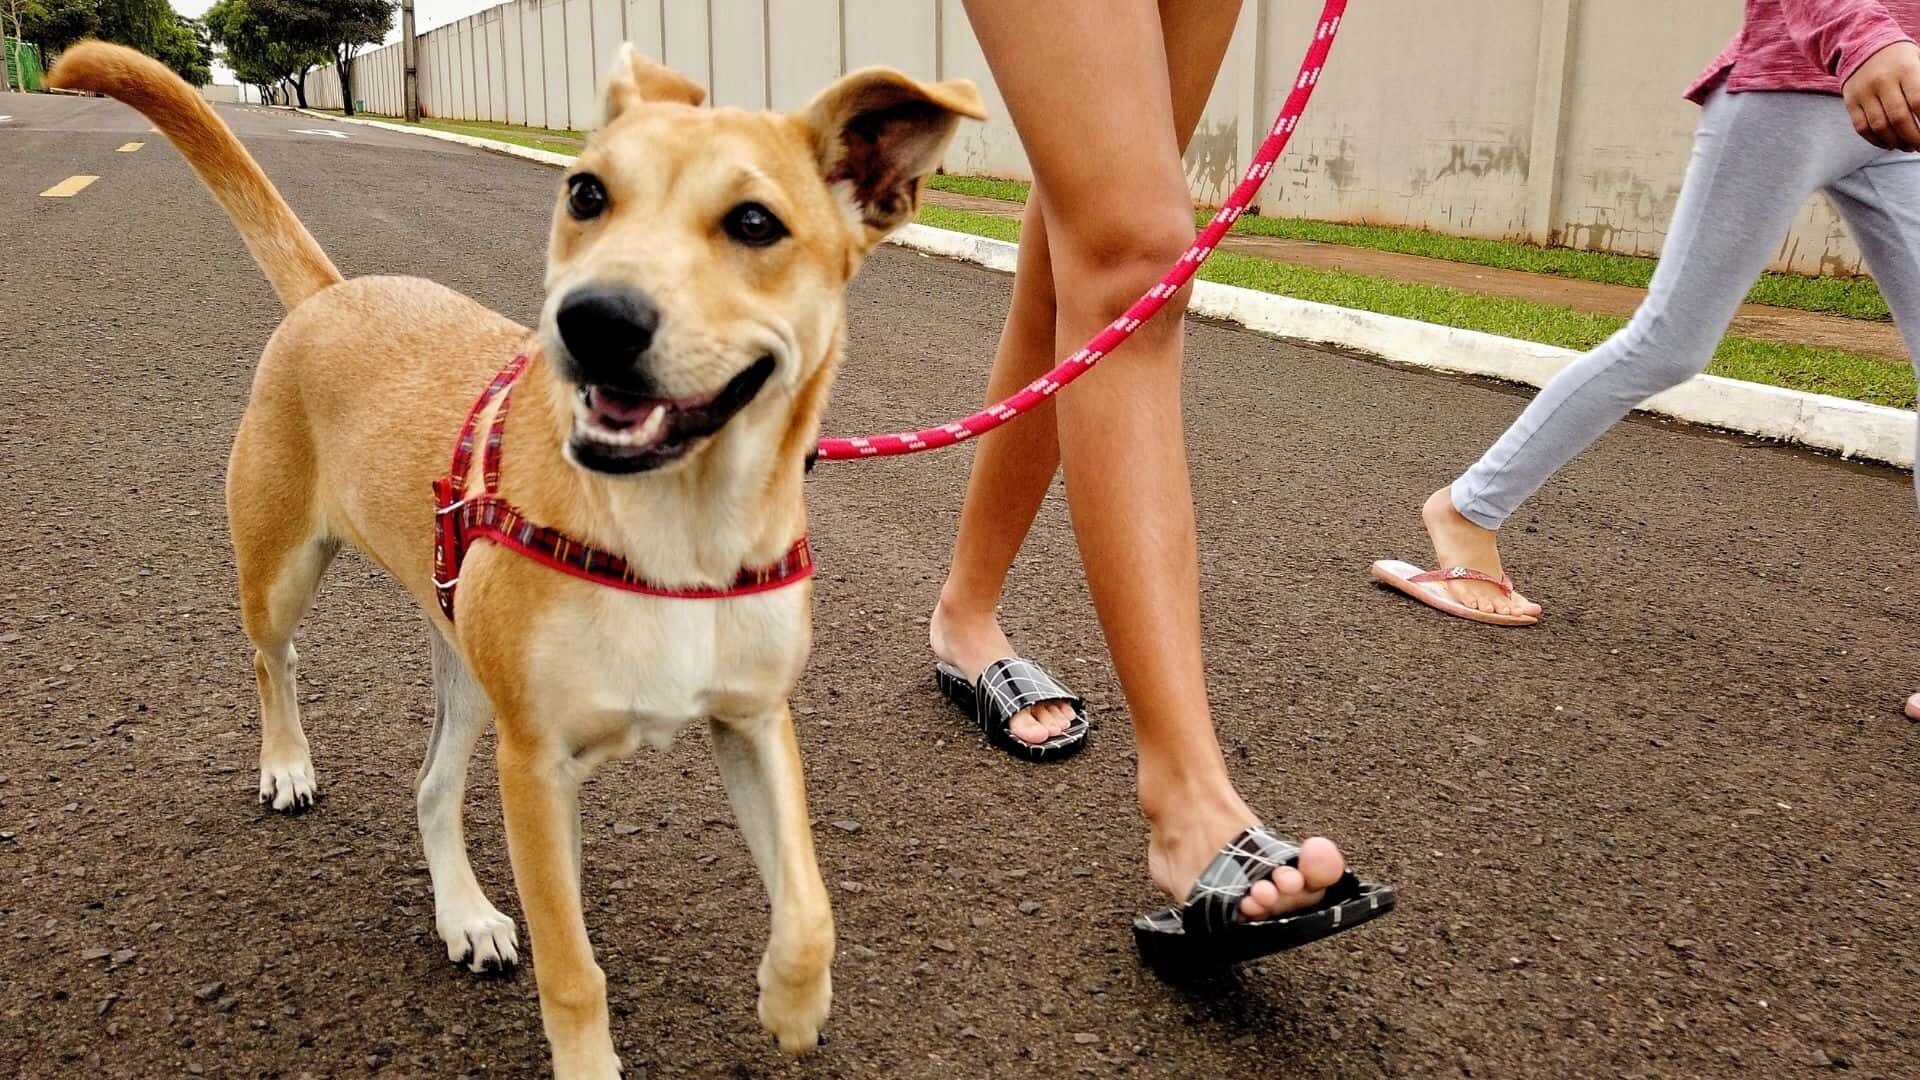 is it against the law to walk a dog without a lead?